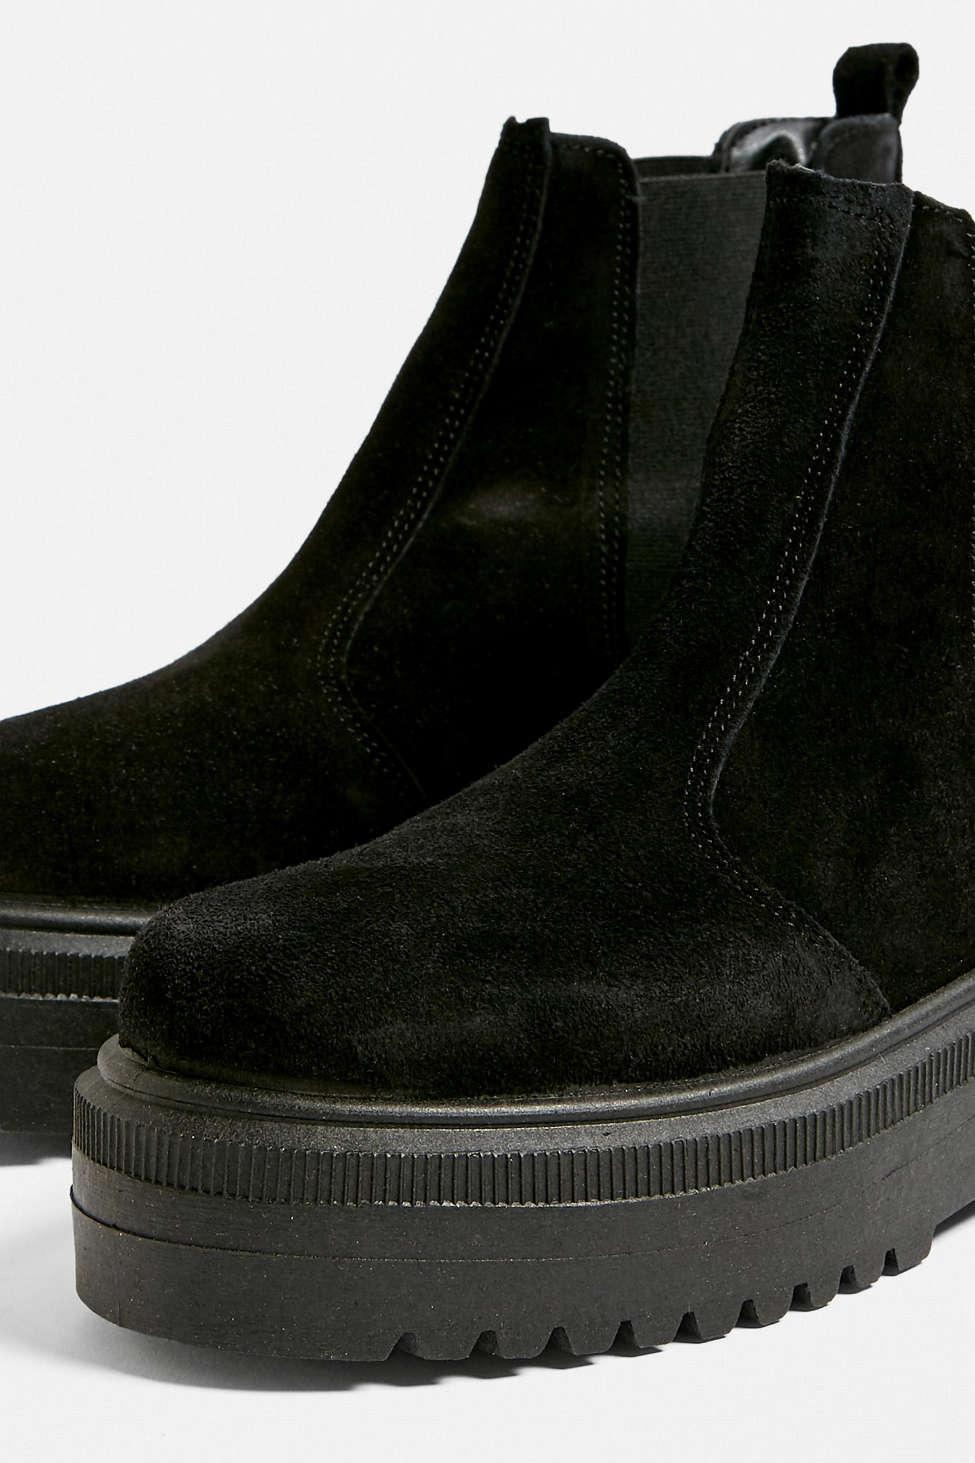 Urban Outfitters Uo Brody Black Suede Platform Chelsea Boots - Lyst